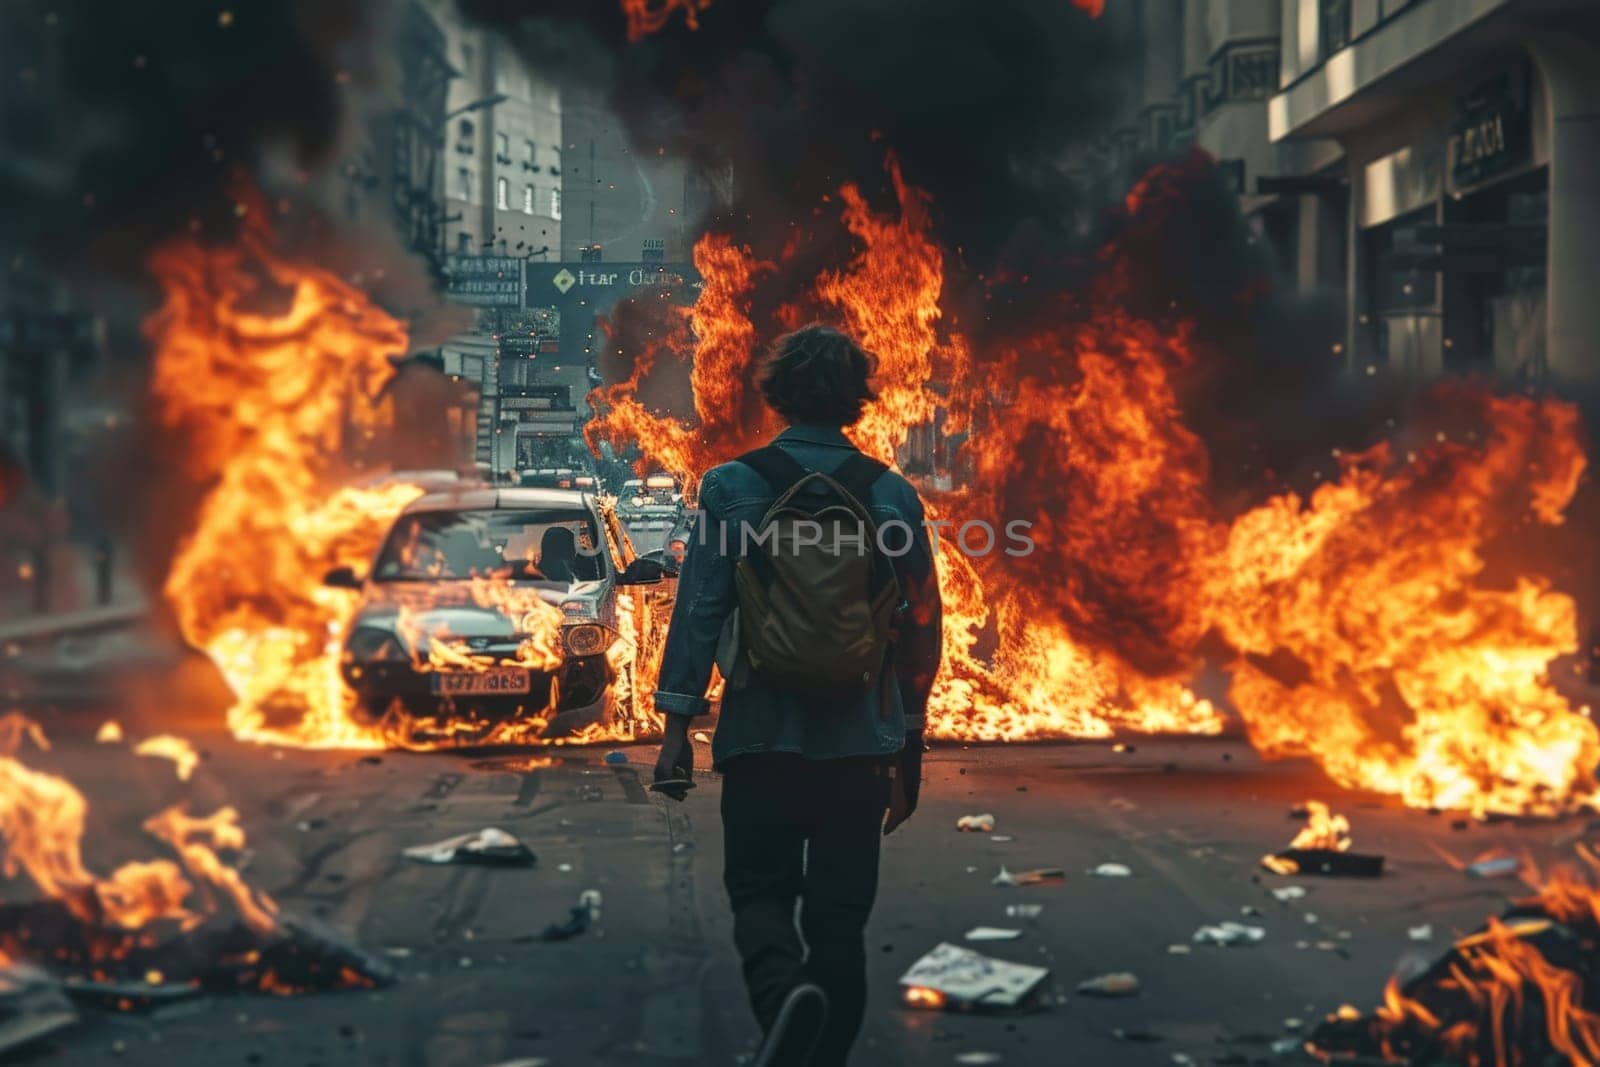 A man walks through a burning city street, with a car in the background by nijieimu